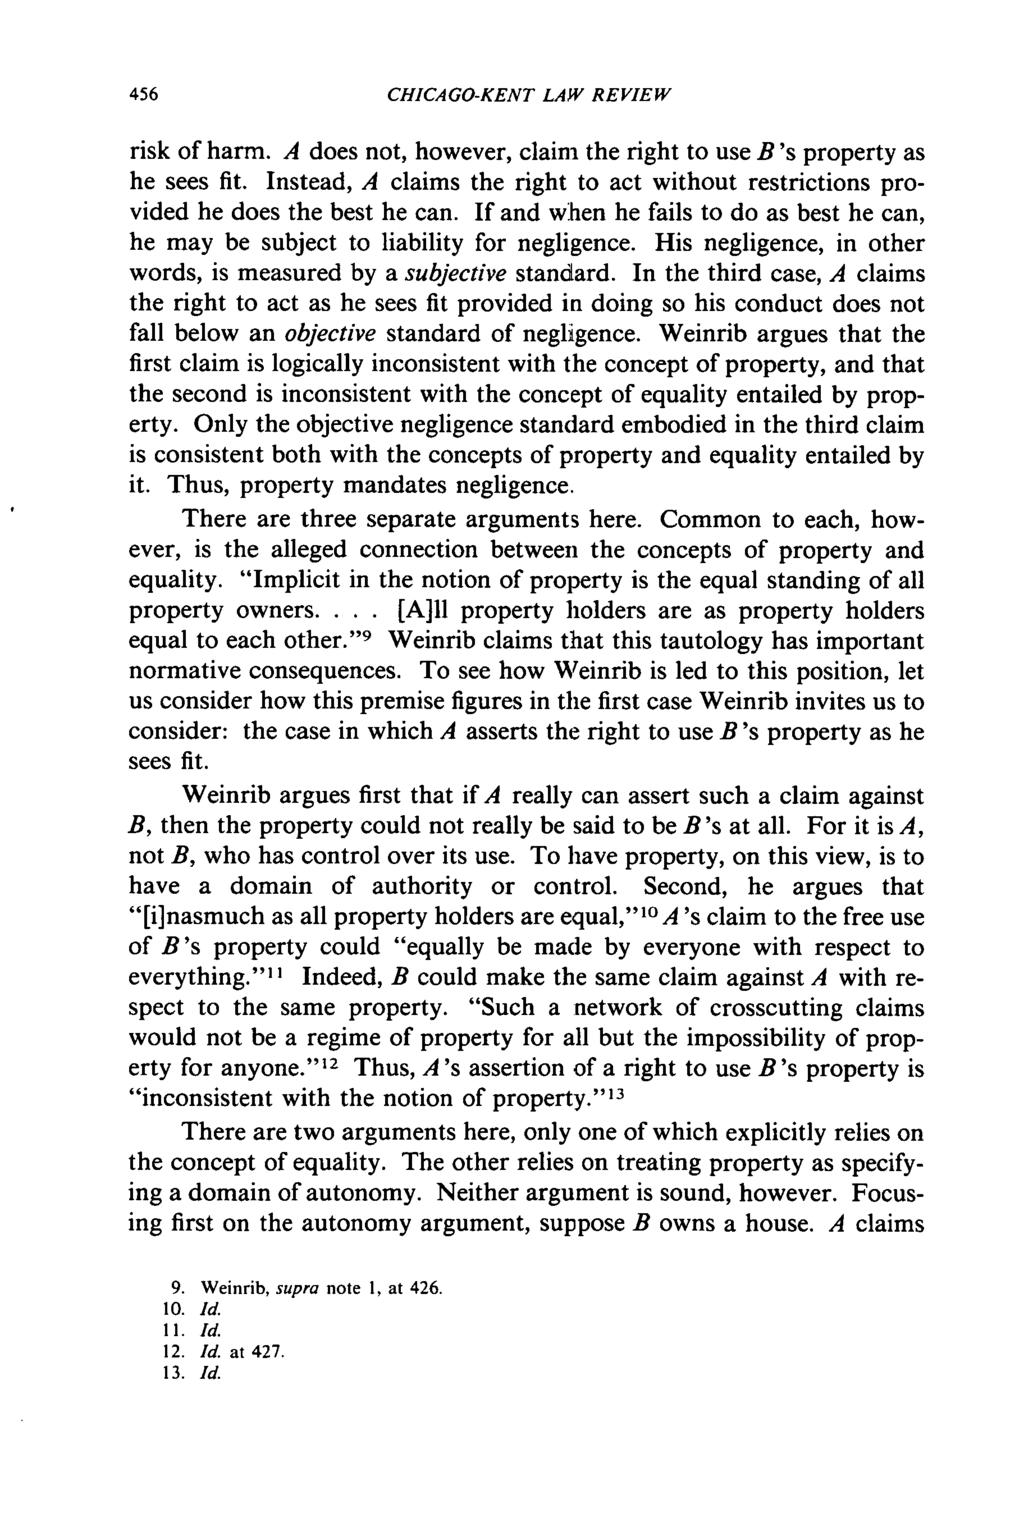 CHICAGO-KENT LAW REVIEW risk of harm. A does not, however, claim the right to use B's property as he sees fit. Instead, A claims the right to act without restrictions provided he does the best he can.